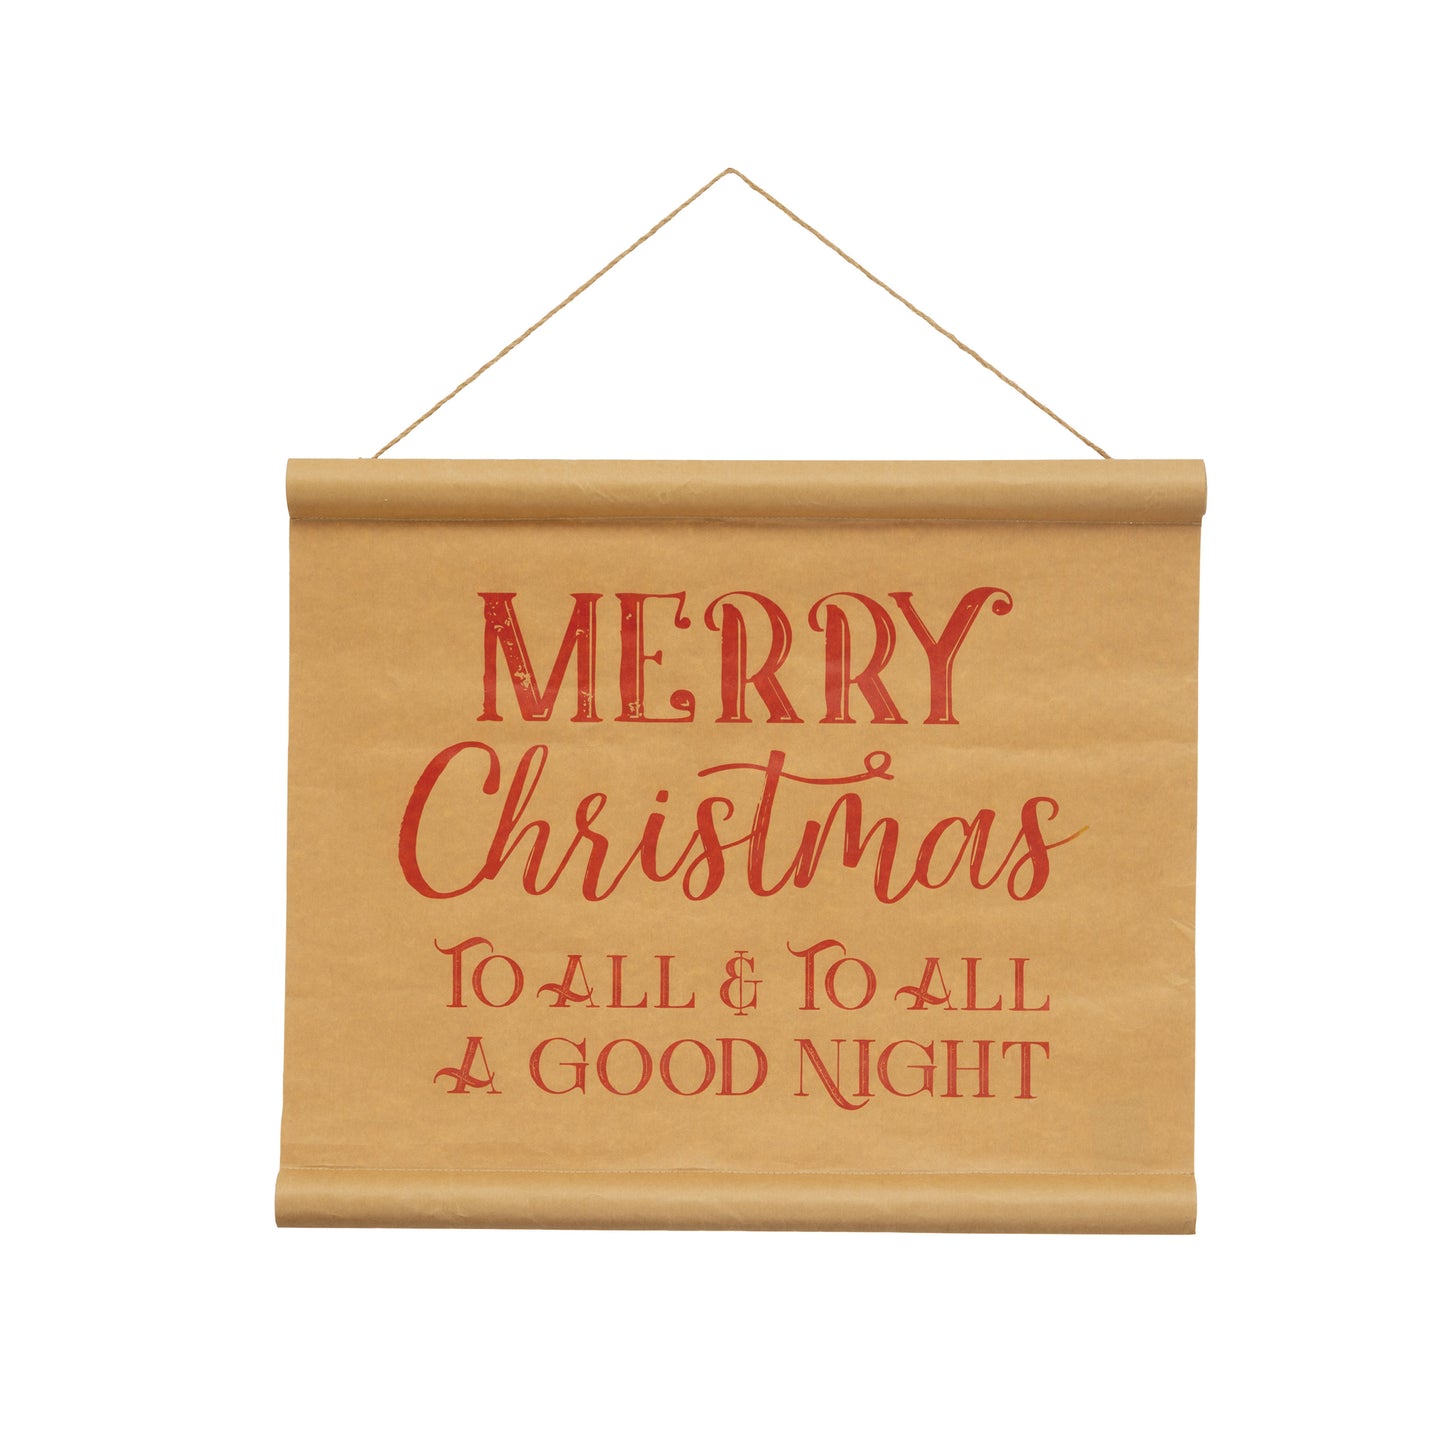 Paper Scroll Wall Decor "Merry Christmas"